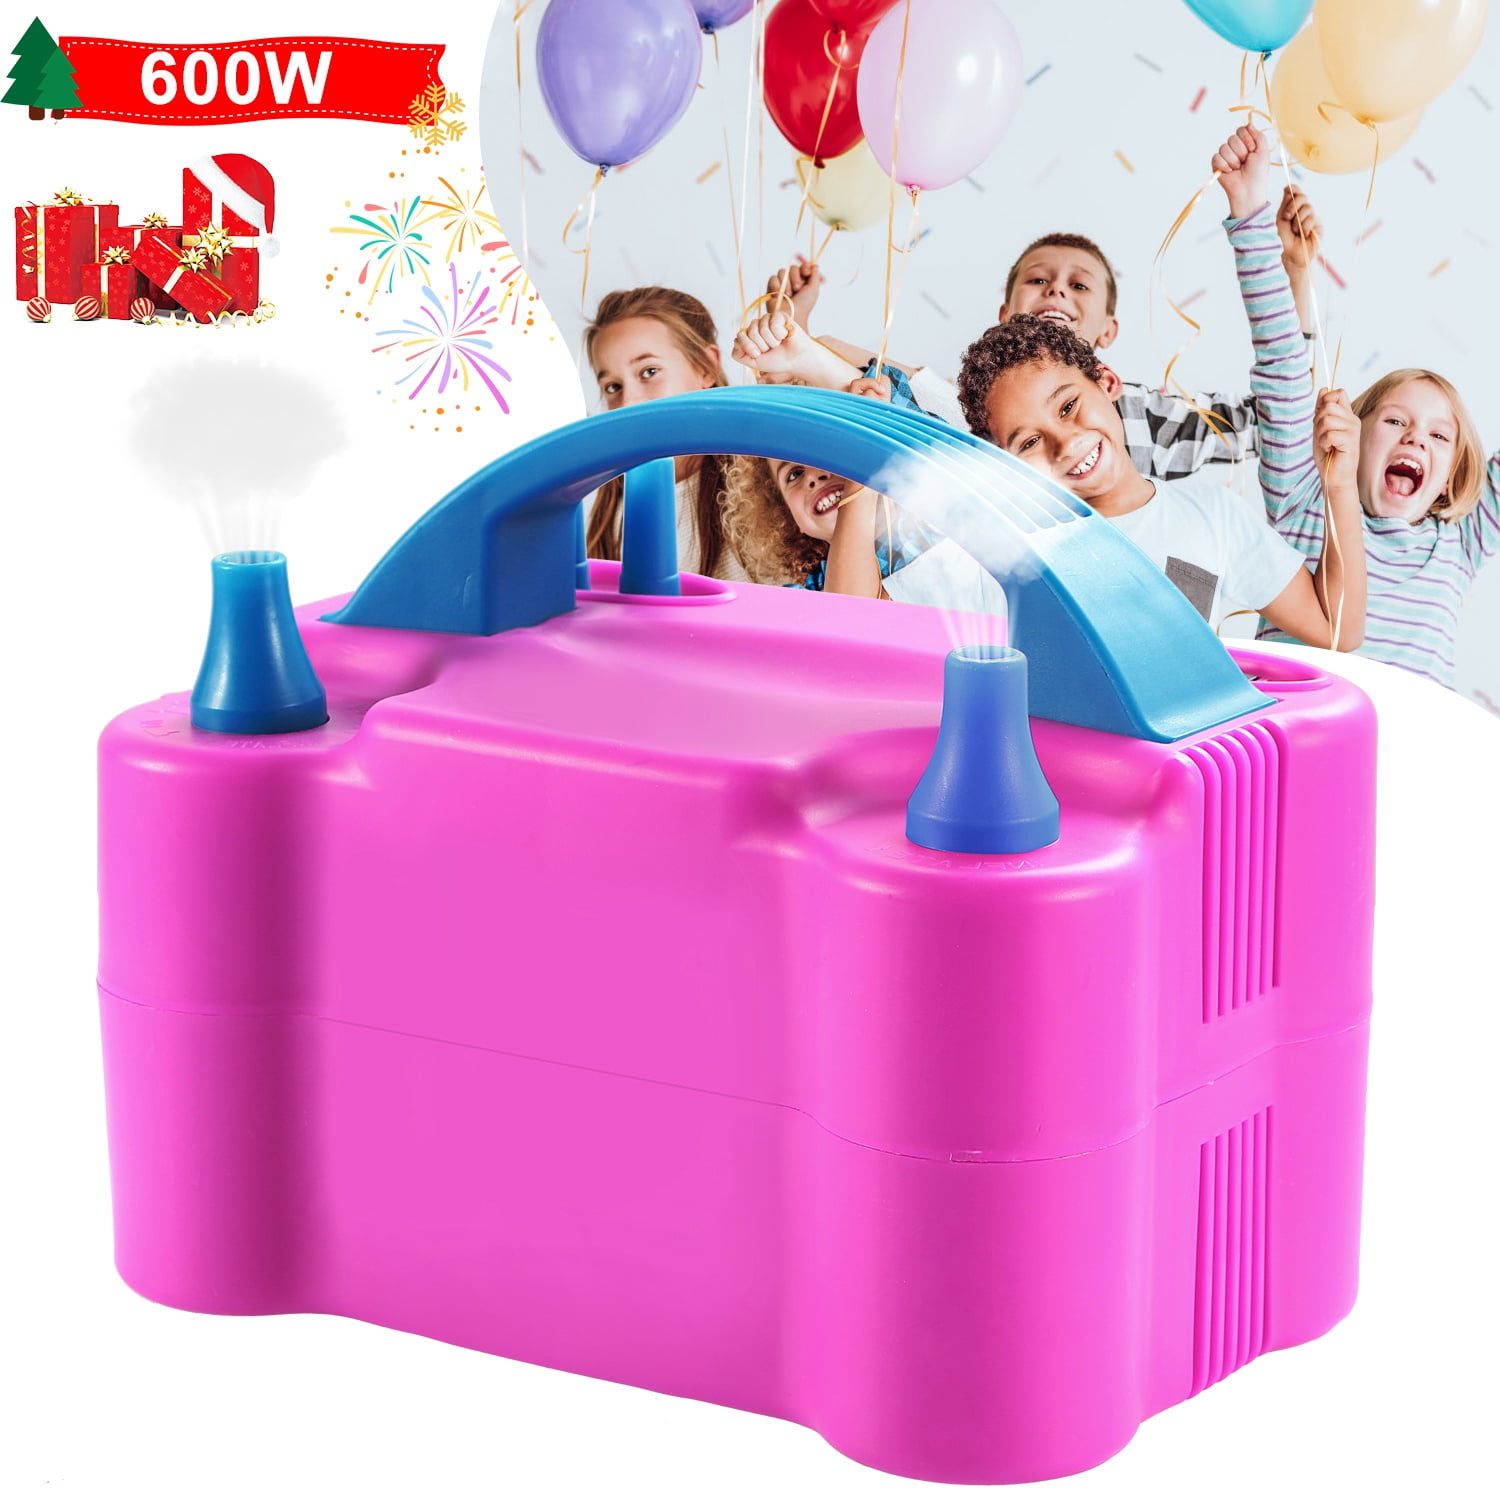 Electric Balloon Pump - Buy Wholesale at SoNice Party